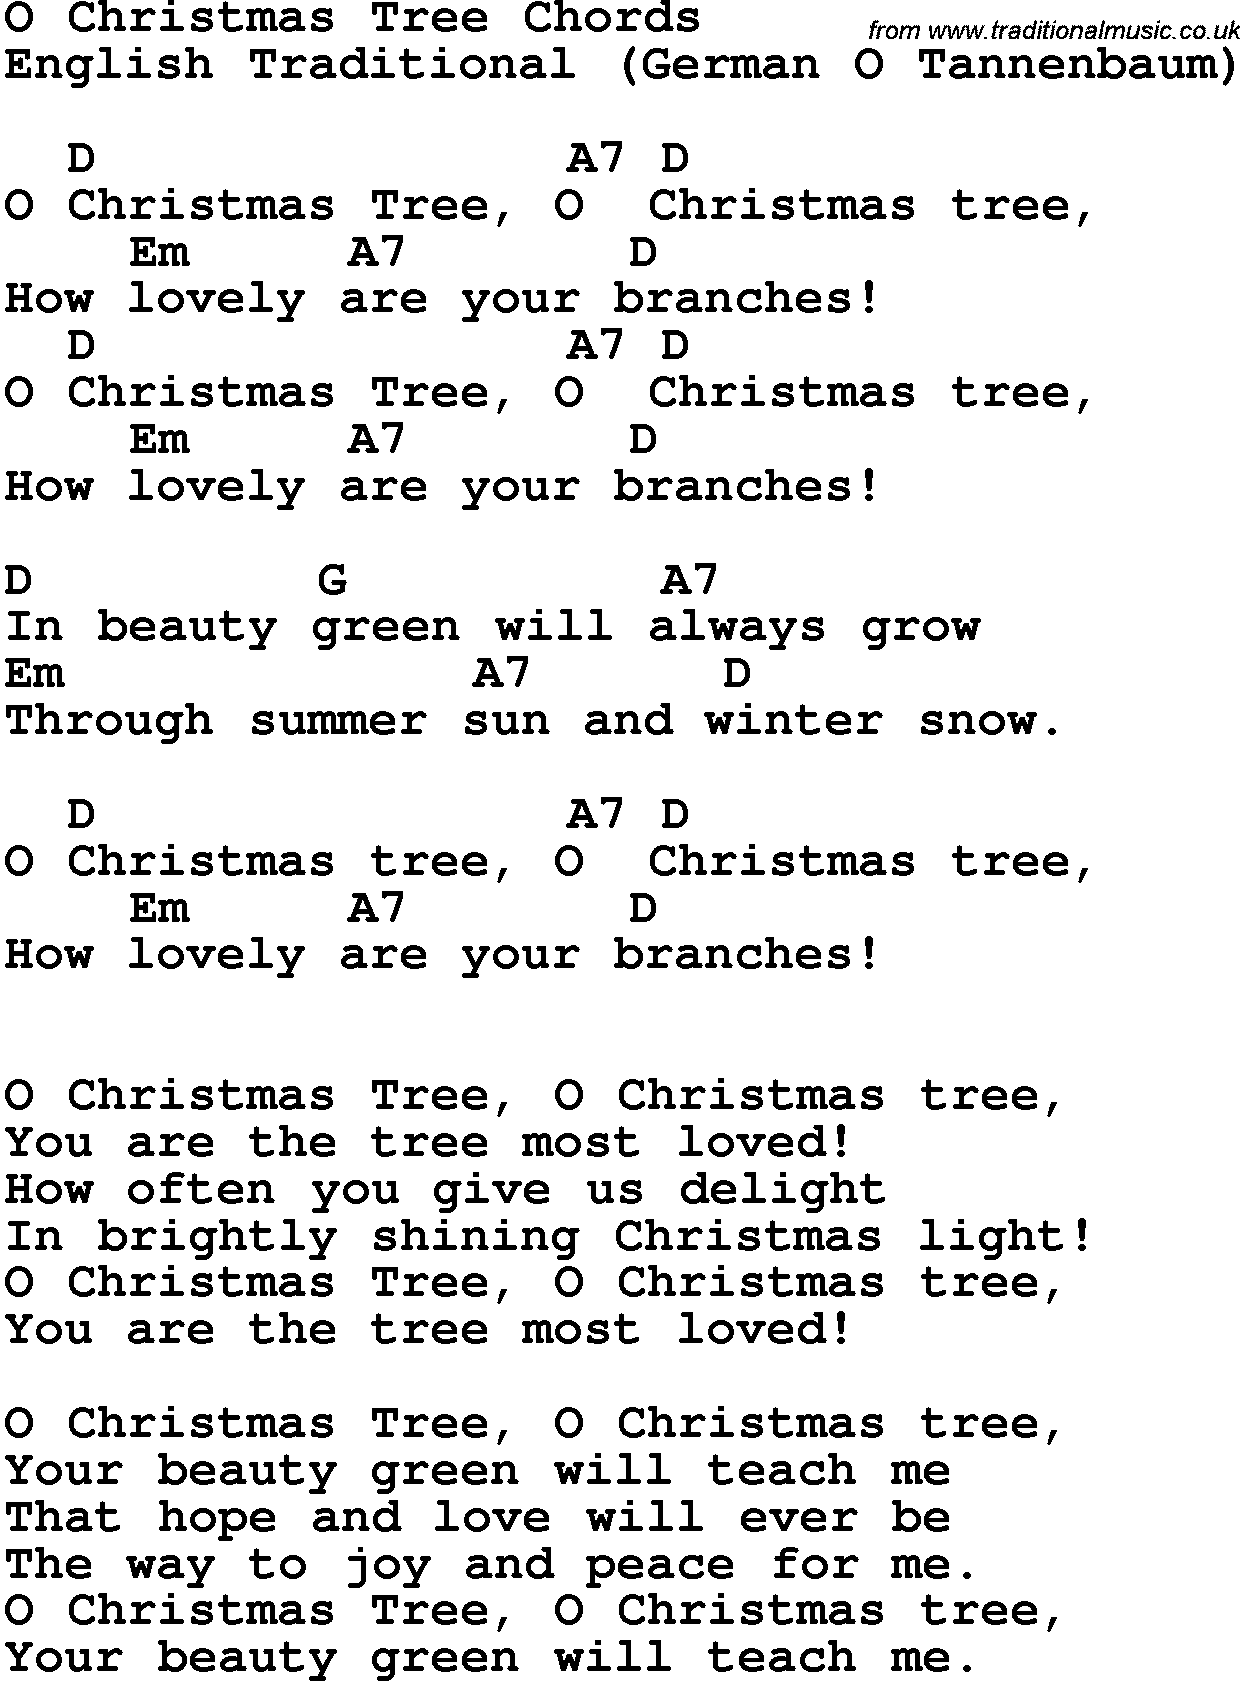 Song Lyrics with guitar chords for O Christmas Tree 2